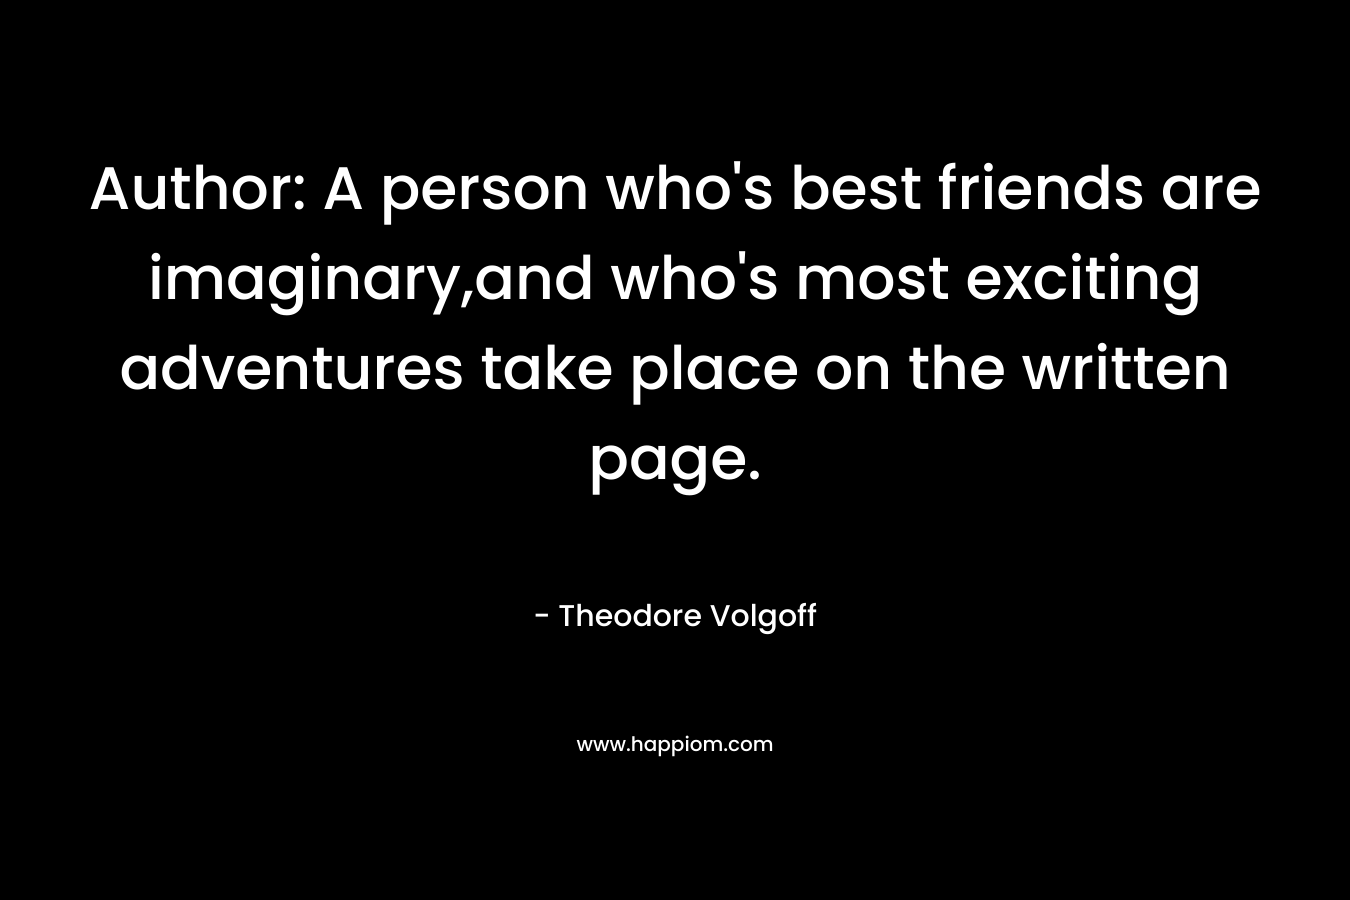 Author: A person who's best friends are imaginary,and who's most exciting adventures take place on the written page.